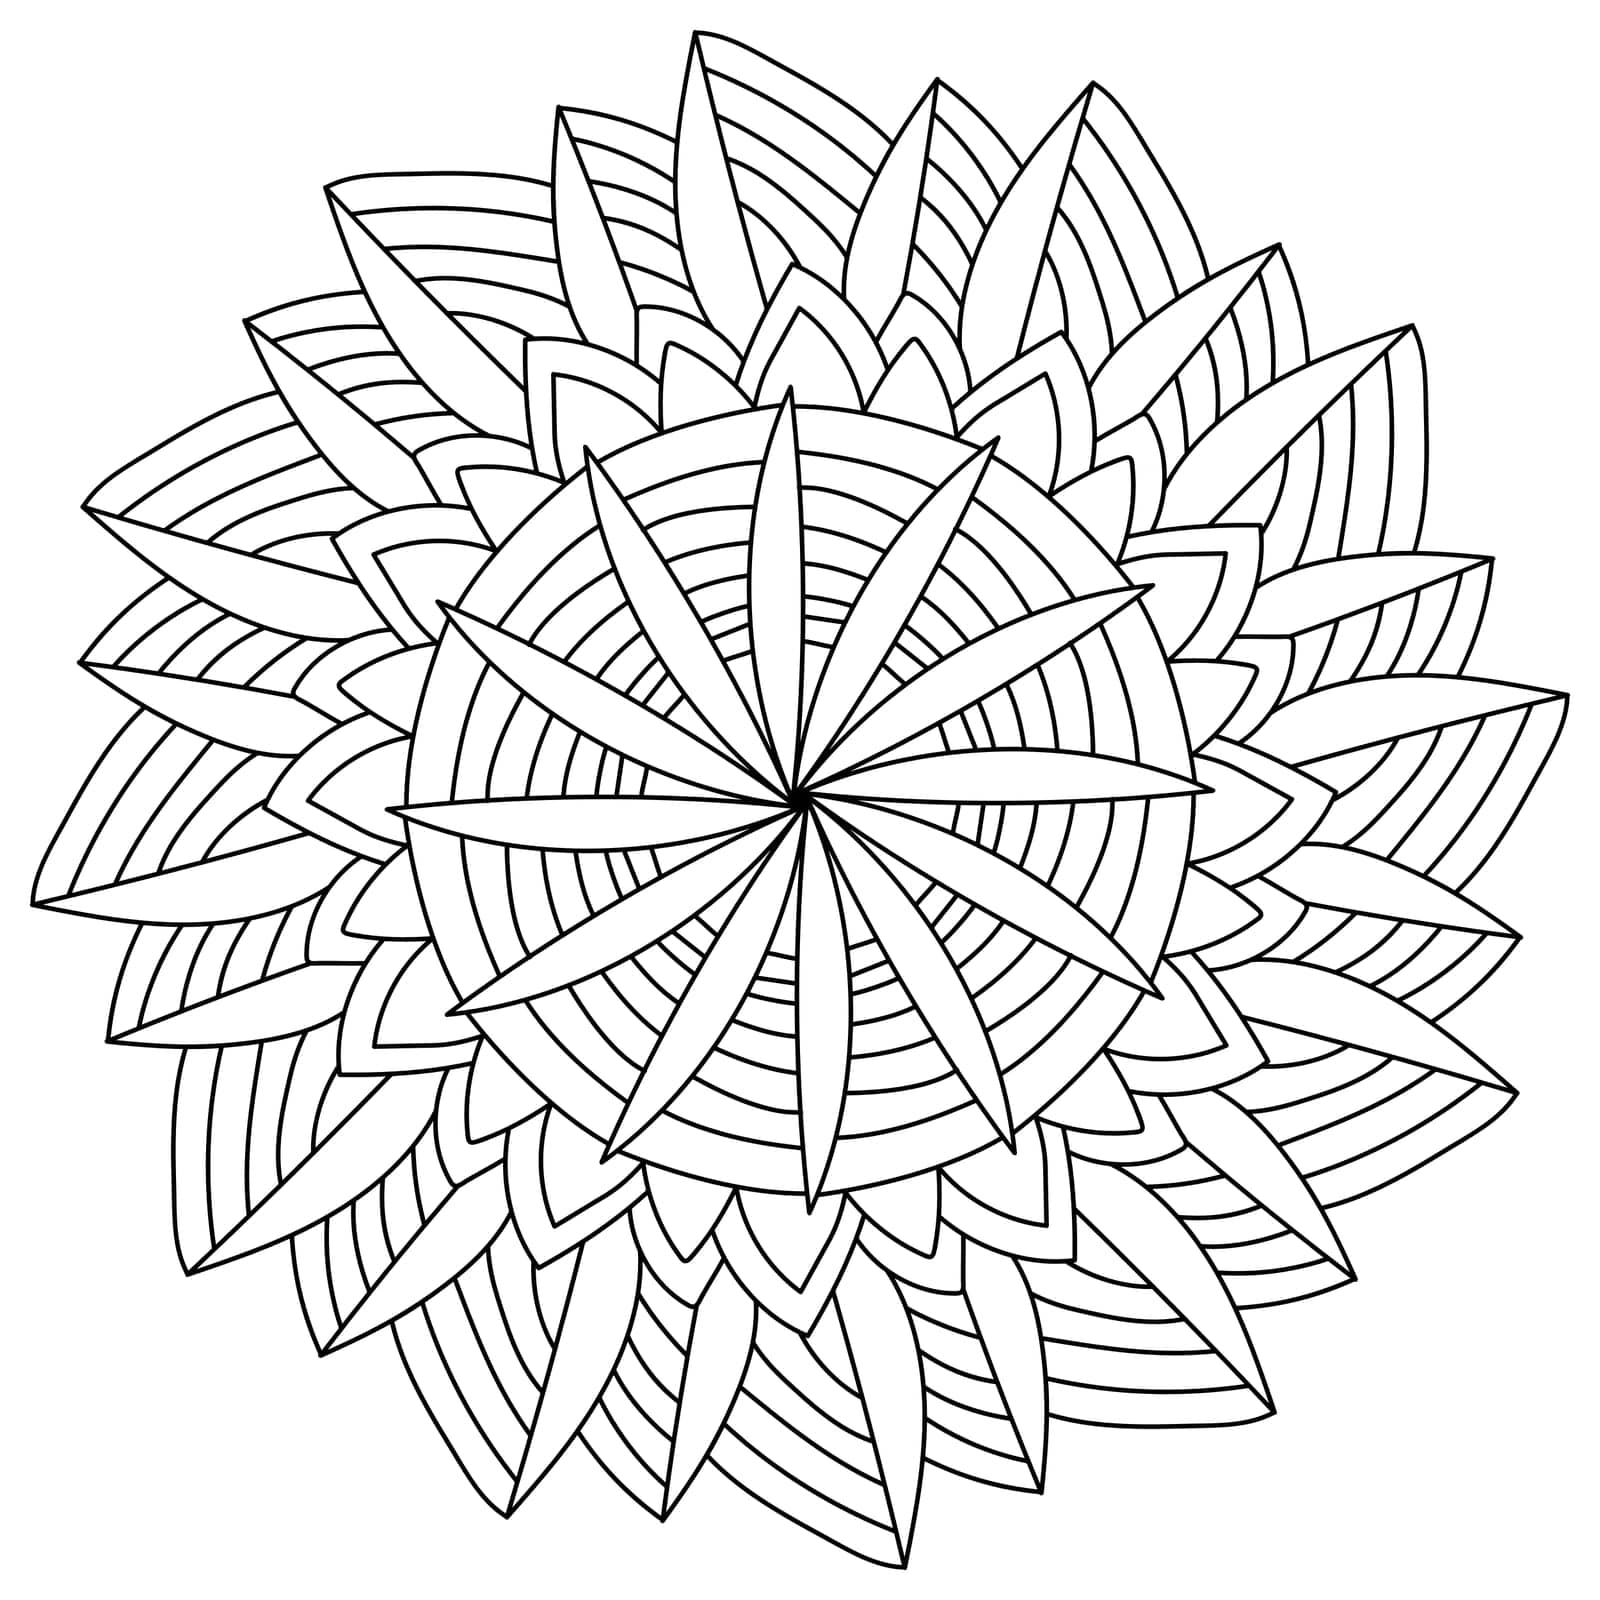 Floral mandala contour with striped petals, meditative coloring page for creativity vector illustration